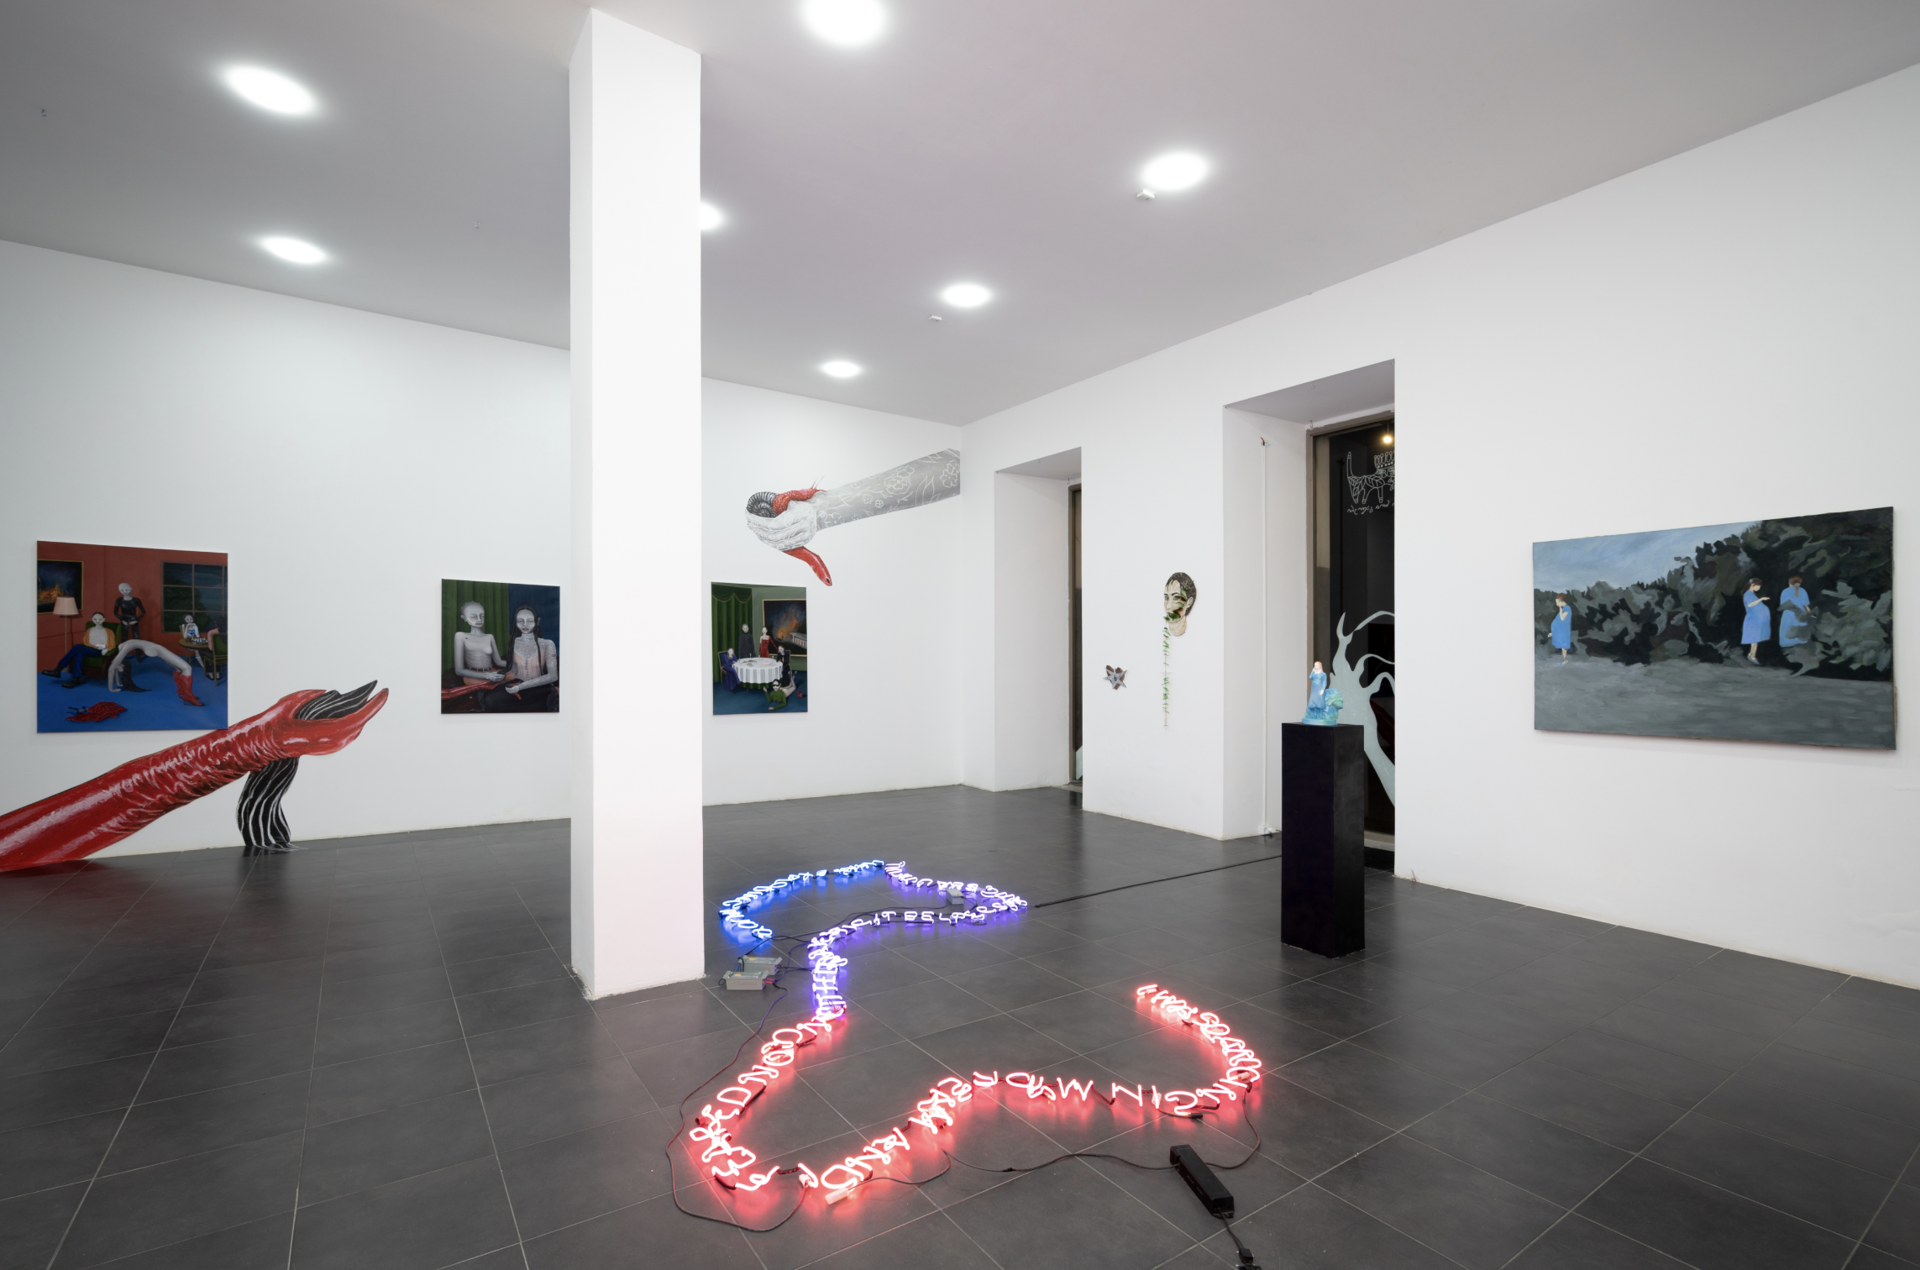 Sorry, no flowers here, installation view